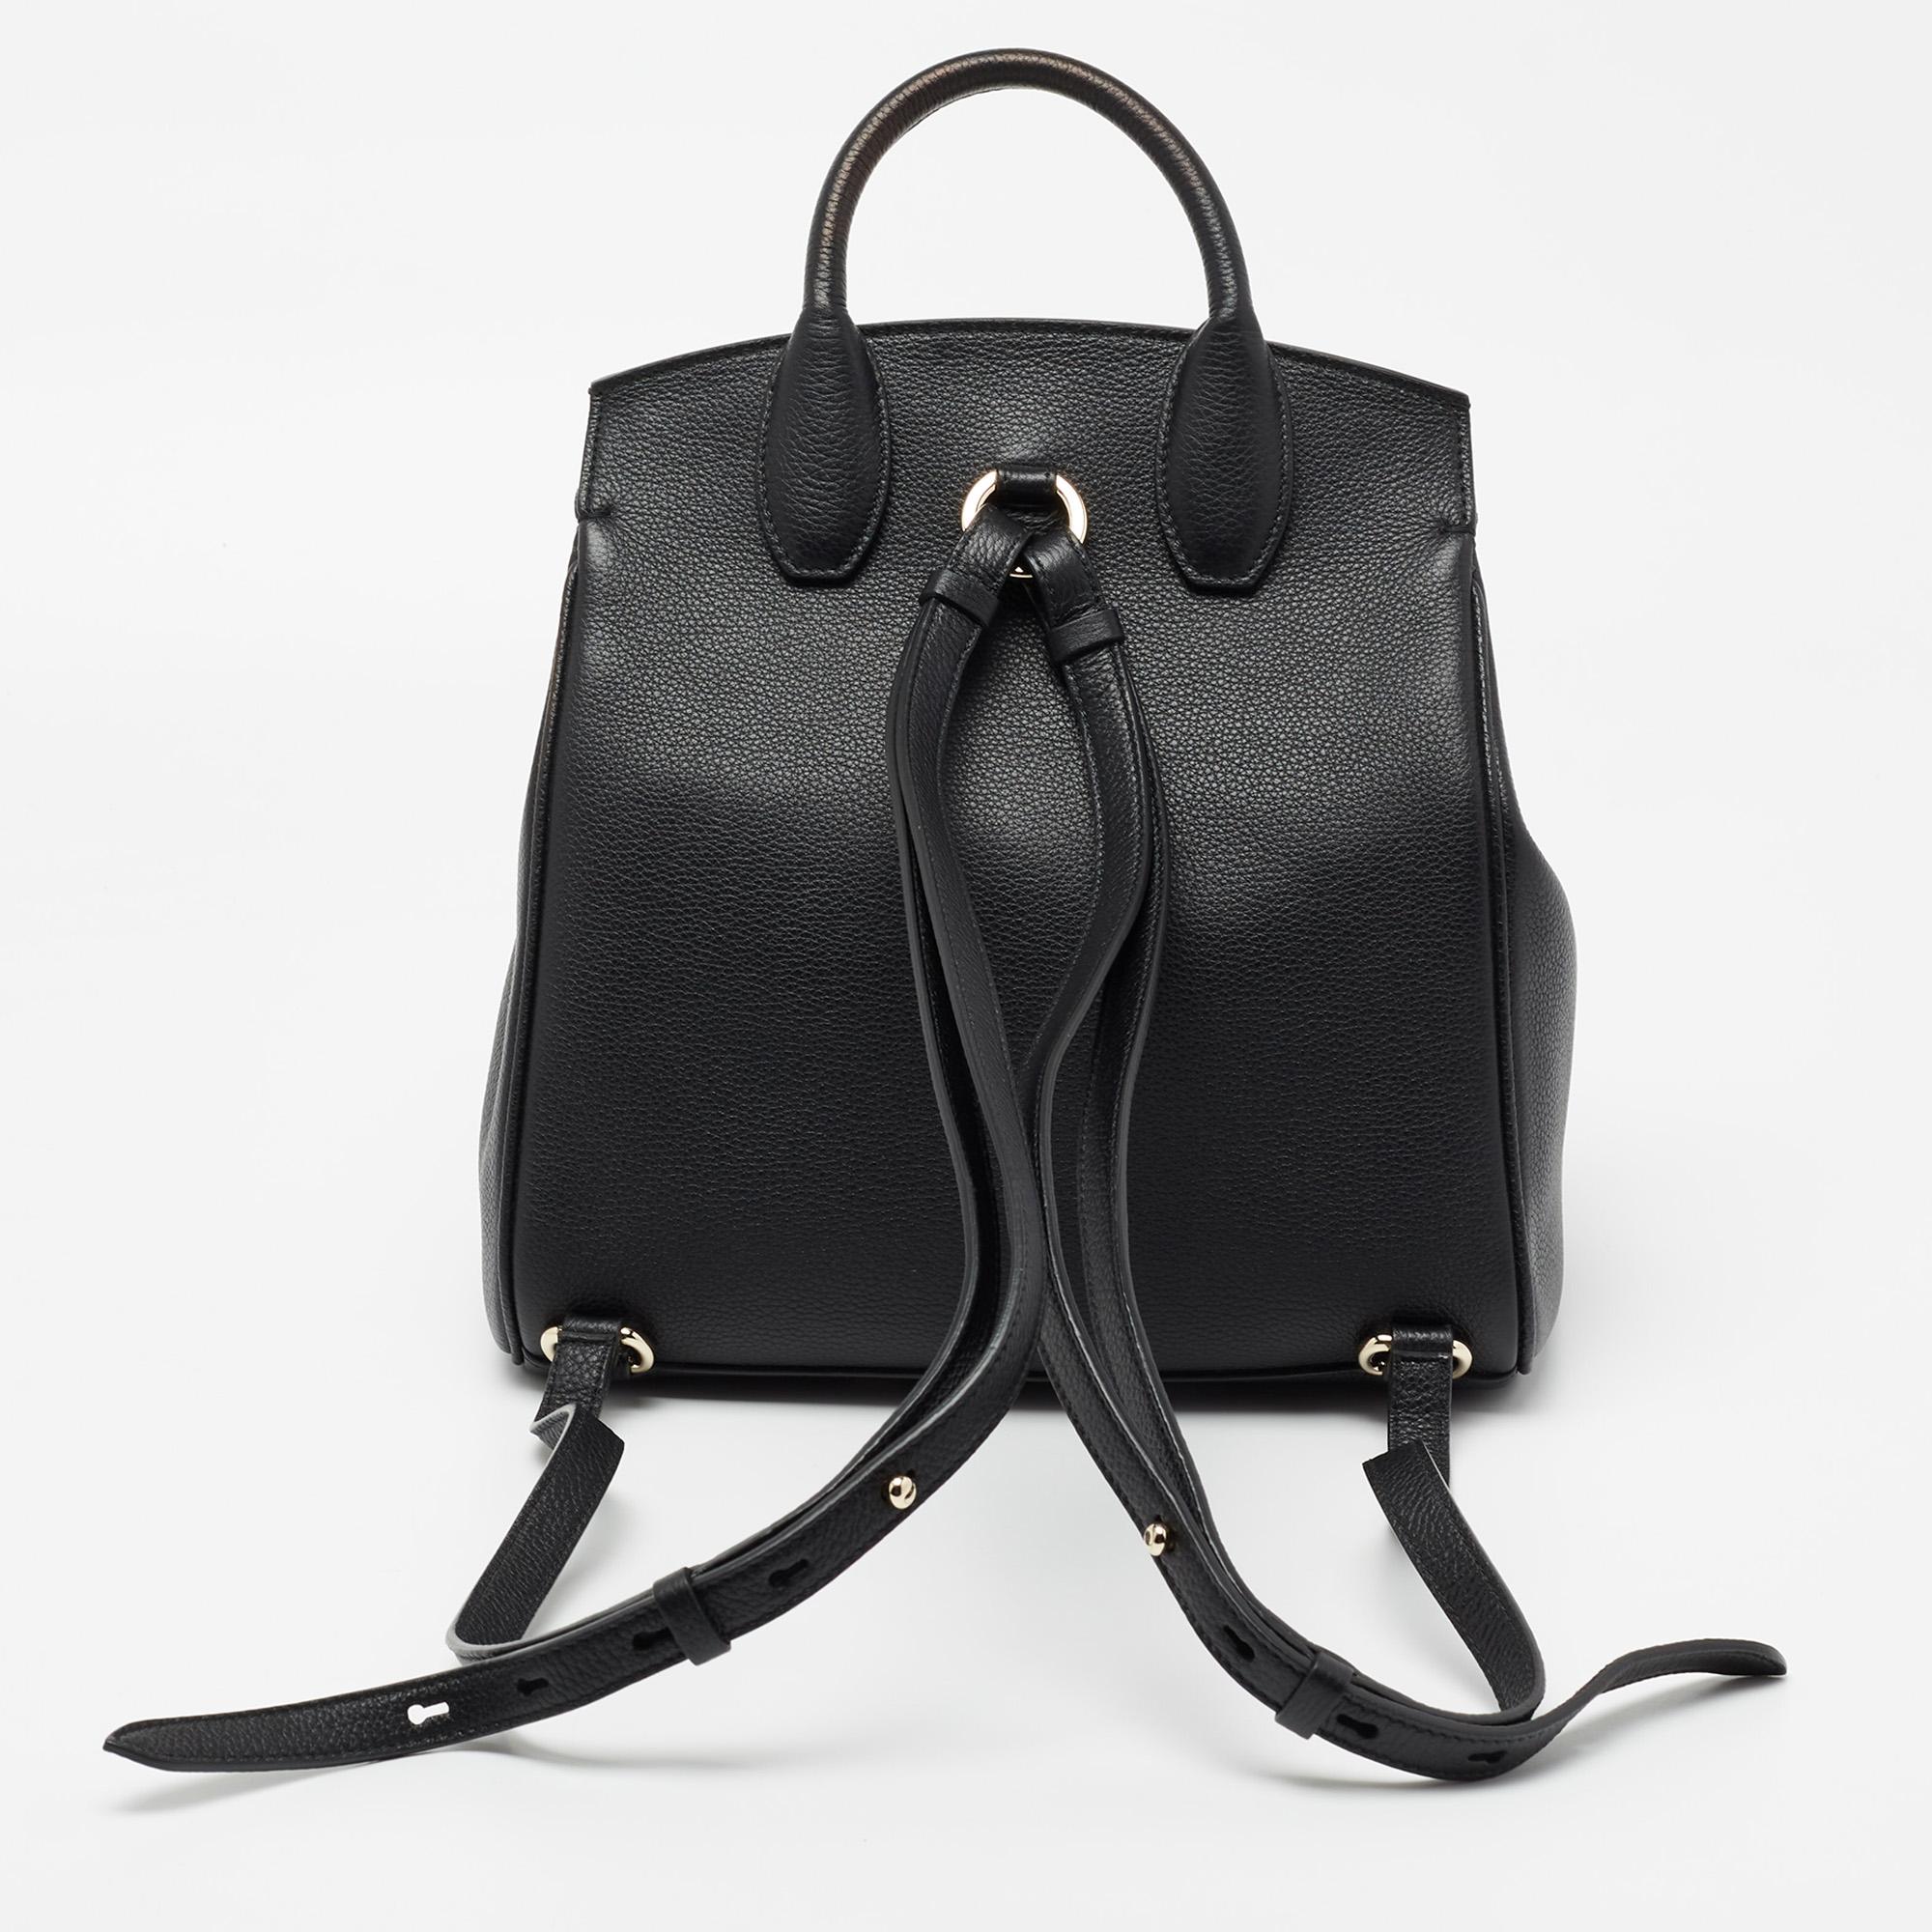 Simple and classy in black, this Salvatore Ferragamo backpack signifies sophistication in its every detail. The Gancini motif on the front adds a signature touch to it, and it is beautified with gold-tone accents. A leather creation, it is made